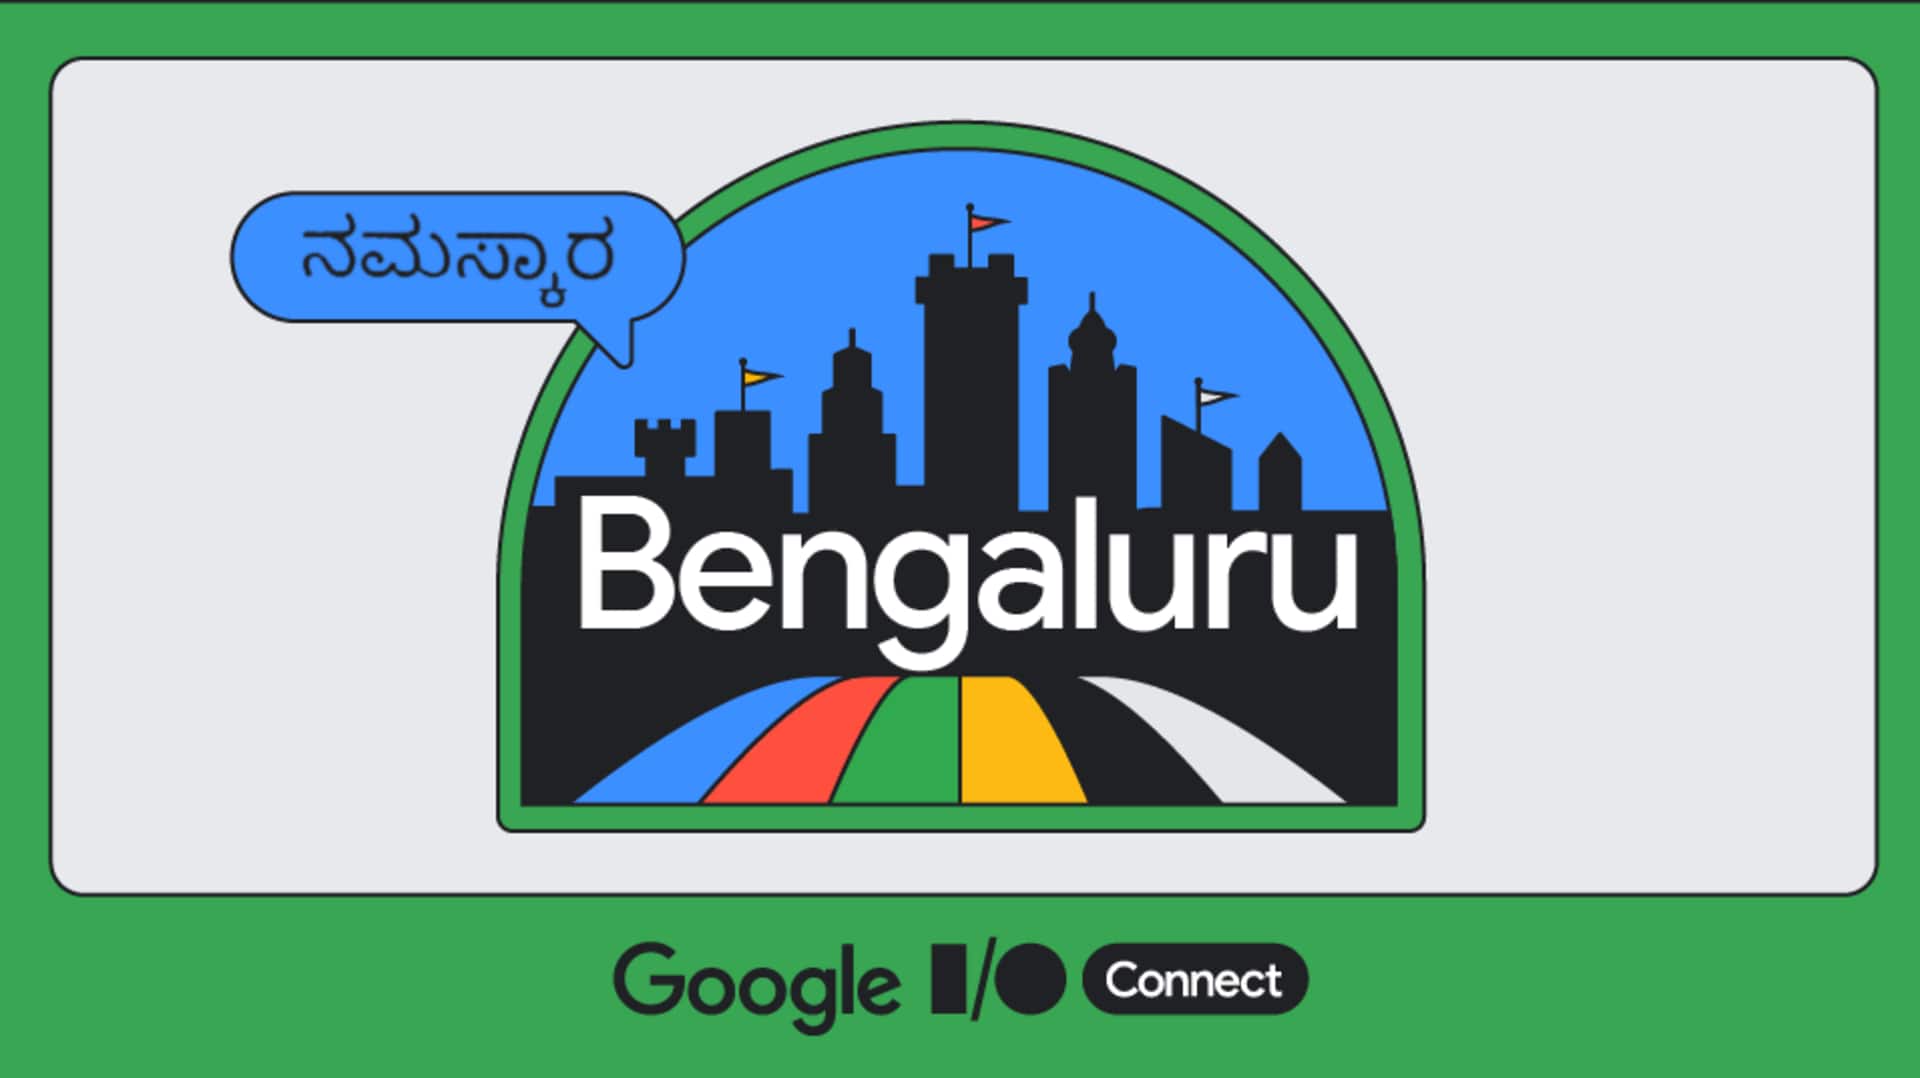 Google India's first I/O Connect developers event: Key takeaways 